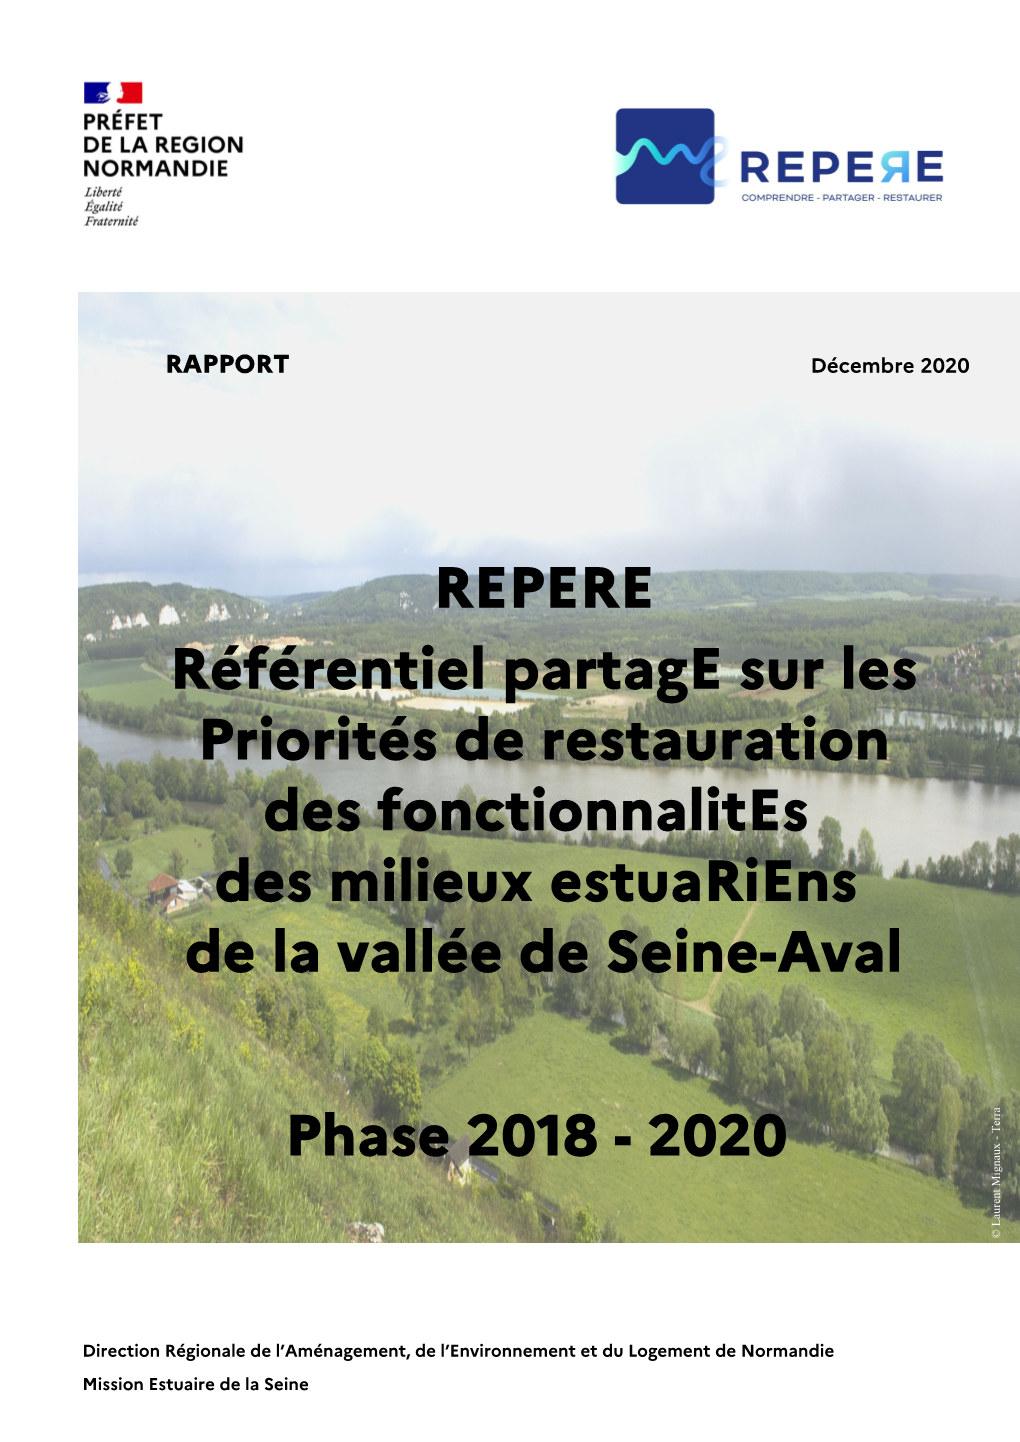 Rapport REPERE Phase 2018-2020